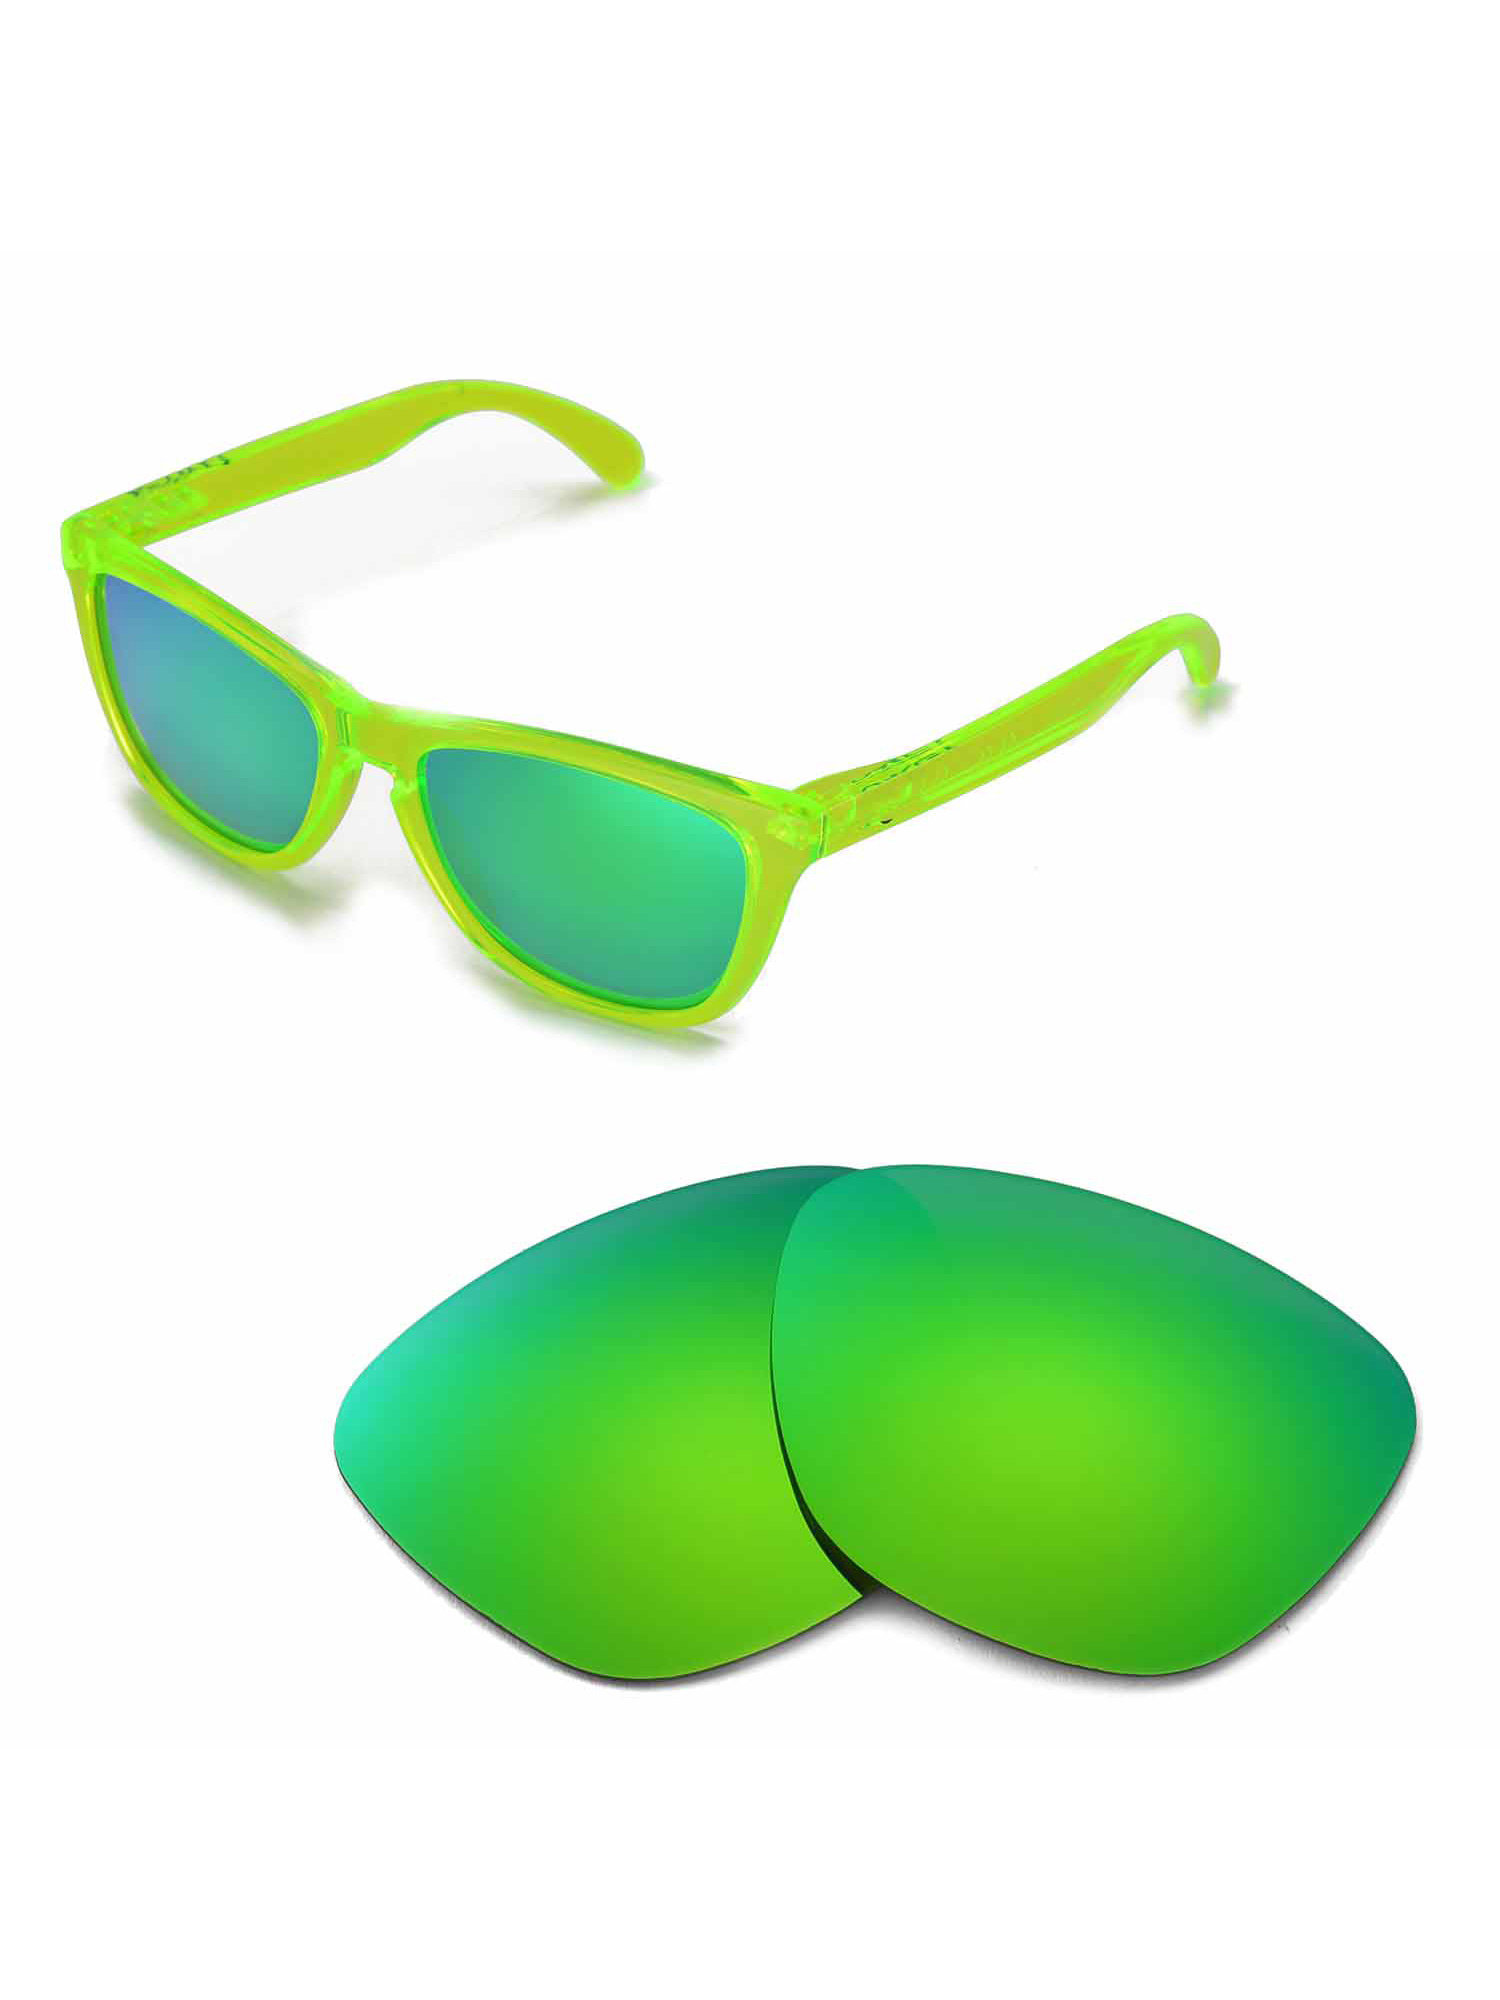 Walleva Emerald Polarized Replacement Lenses for Oakley Frogskins Sunglasses - image 1 of 6